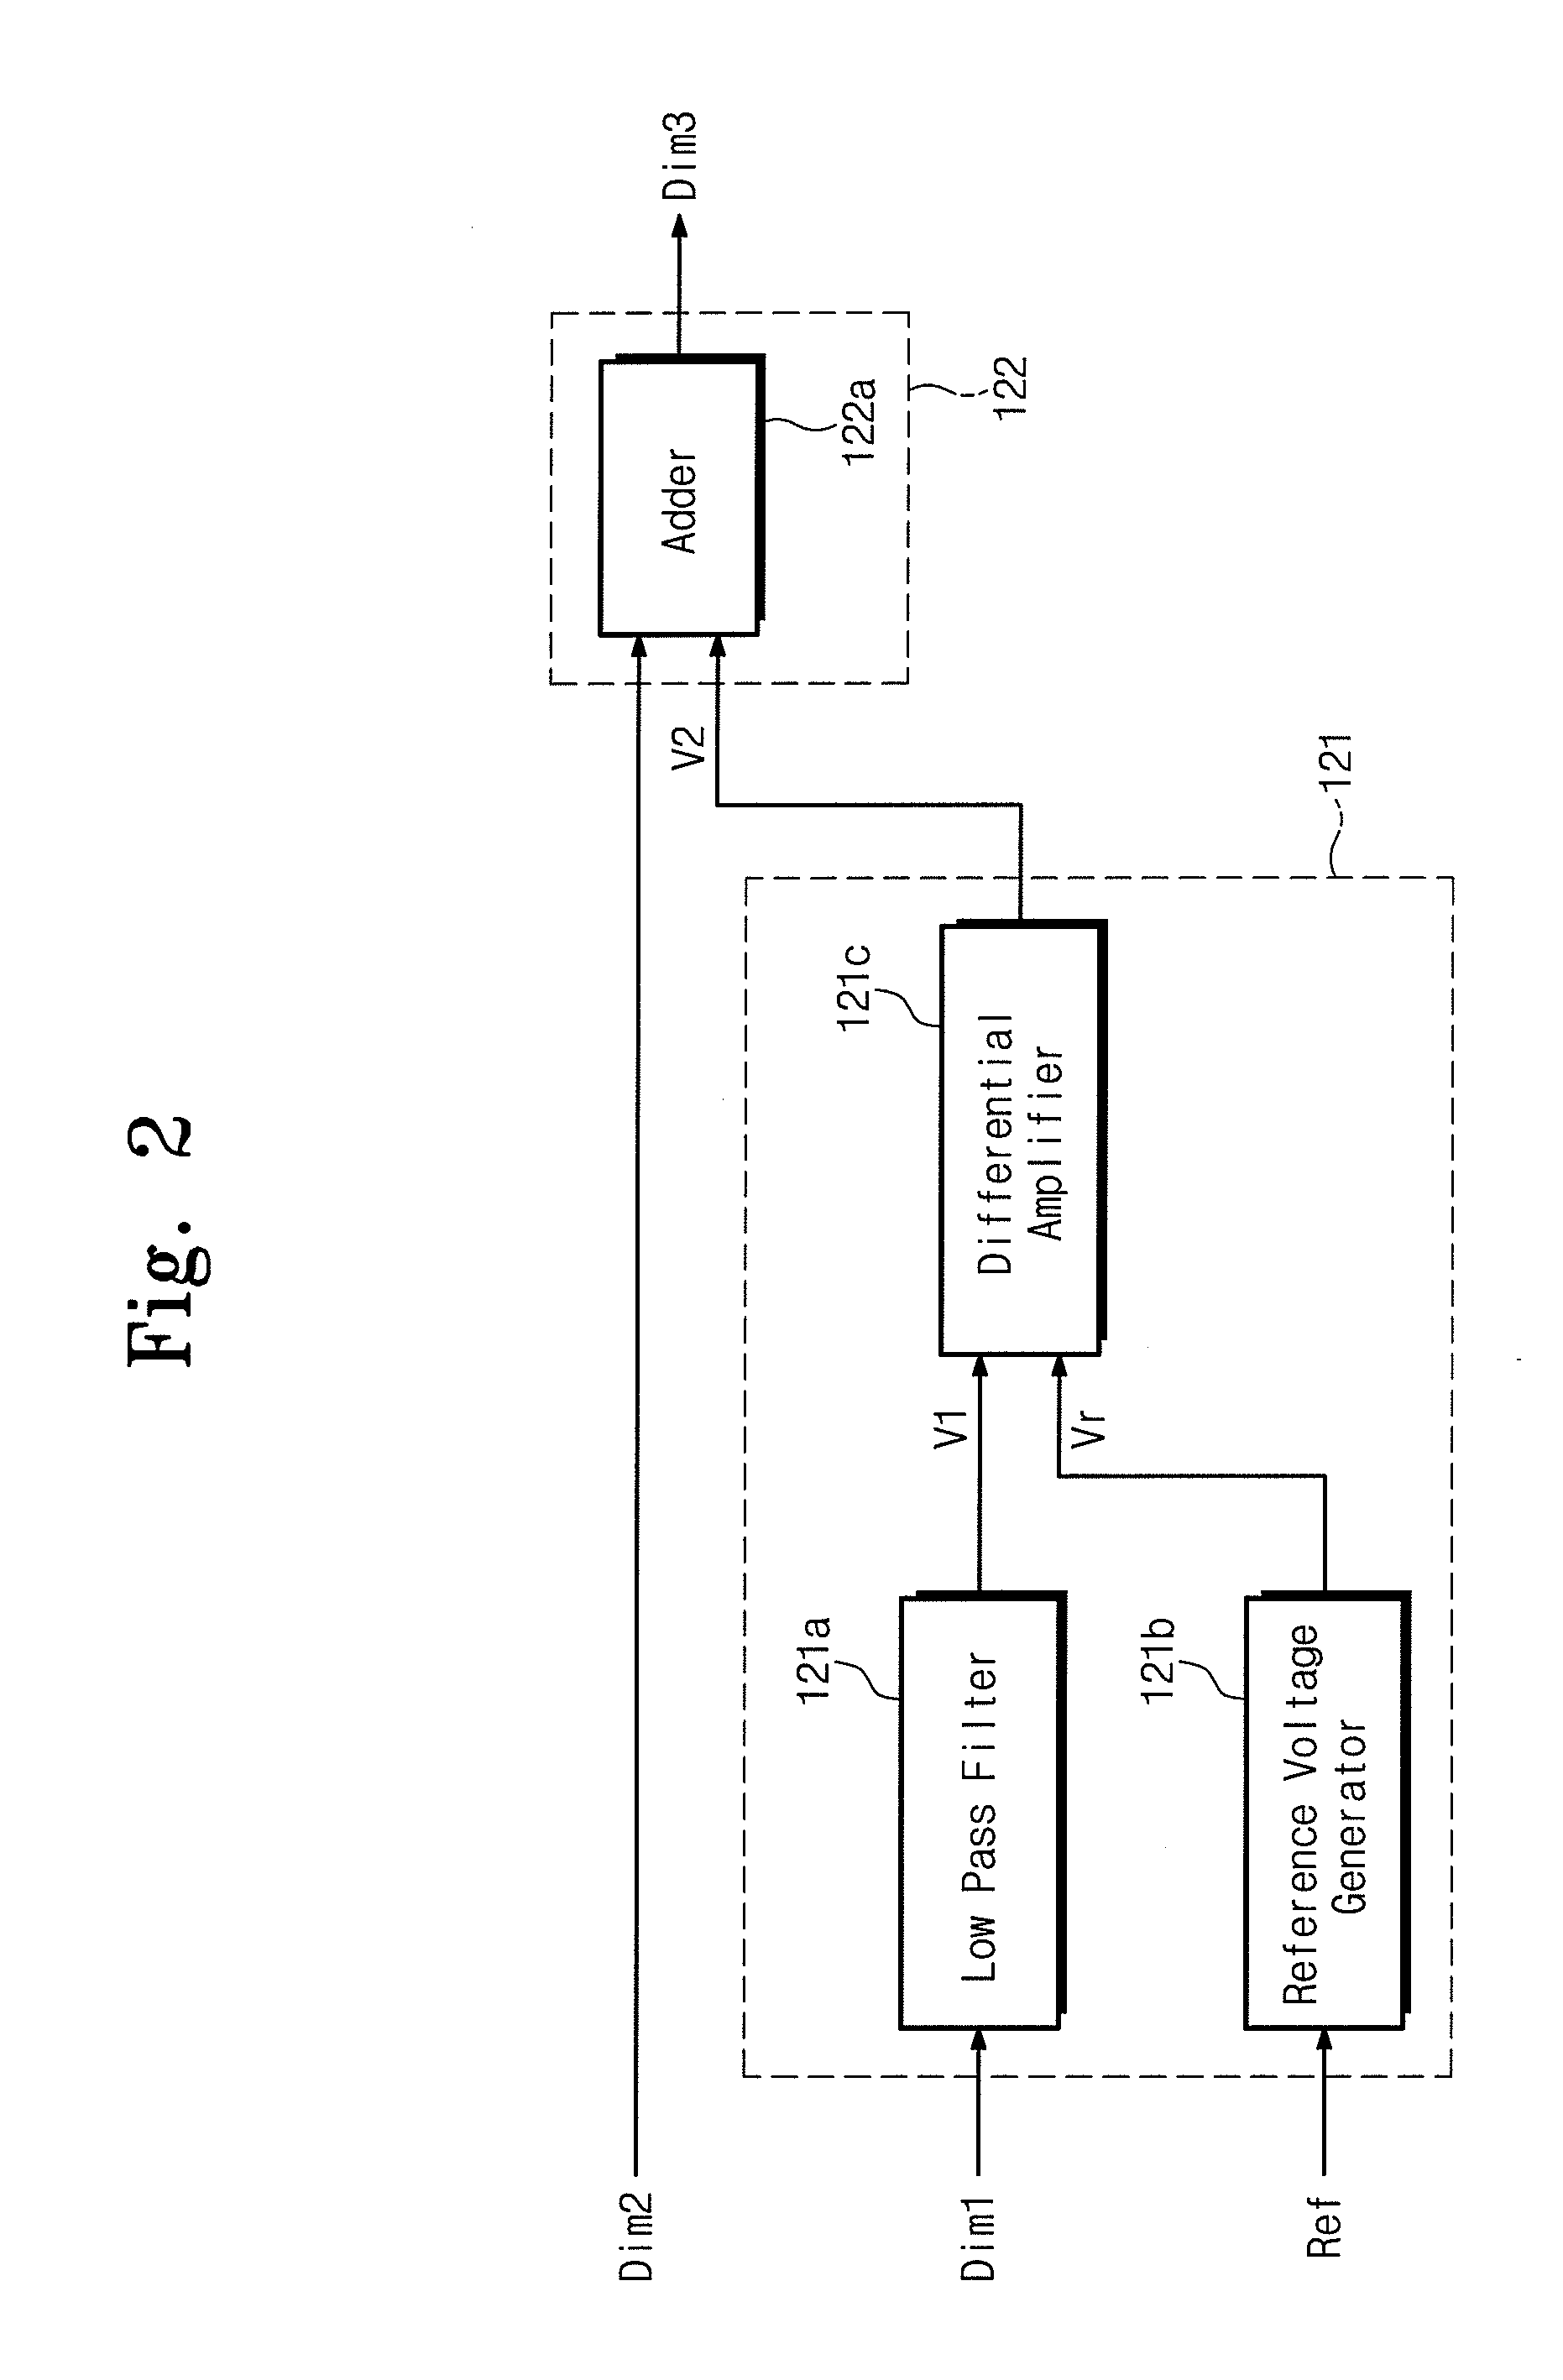 Backlight driver, display apparatus having the same and method of driving backlight